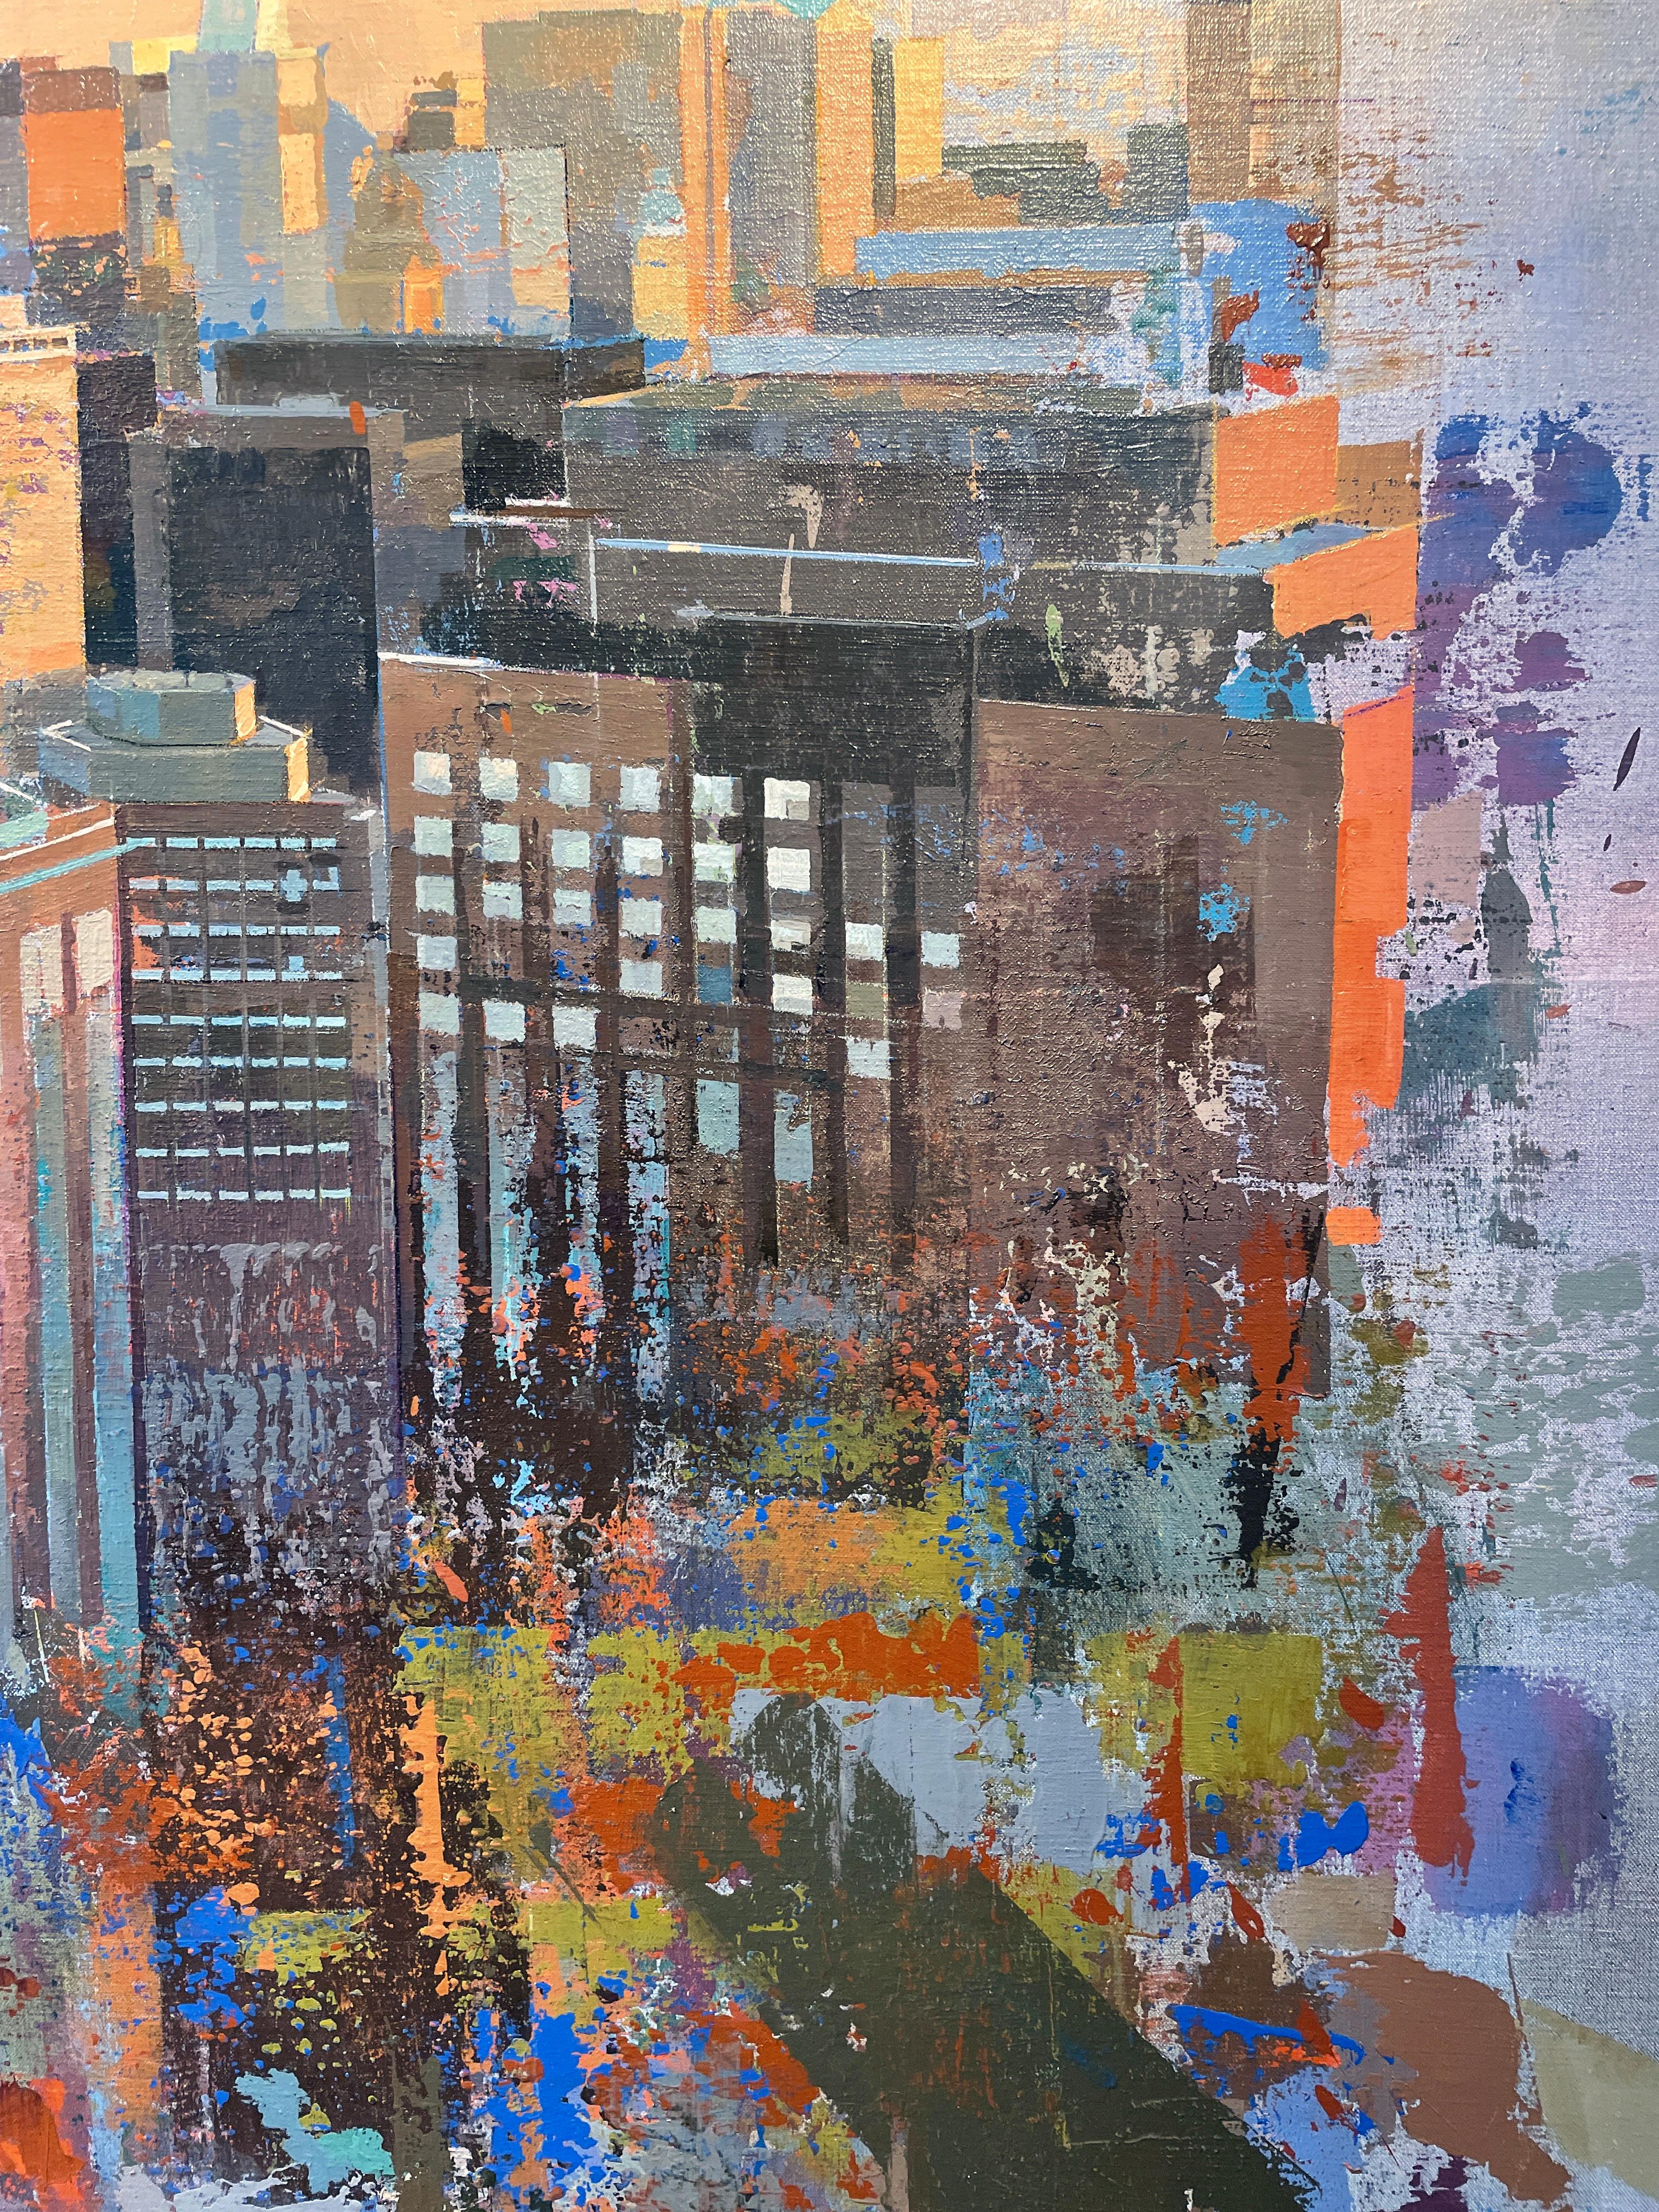 American City, Abstracted Landscape of Chicago Skyline, Original Acrylic  1